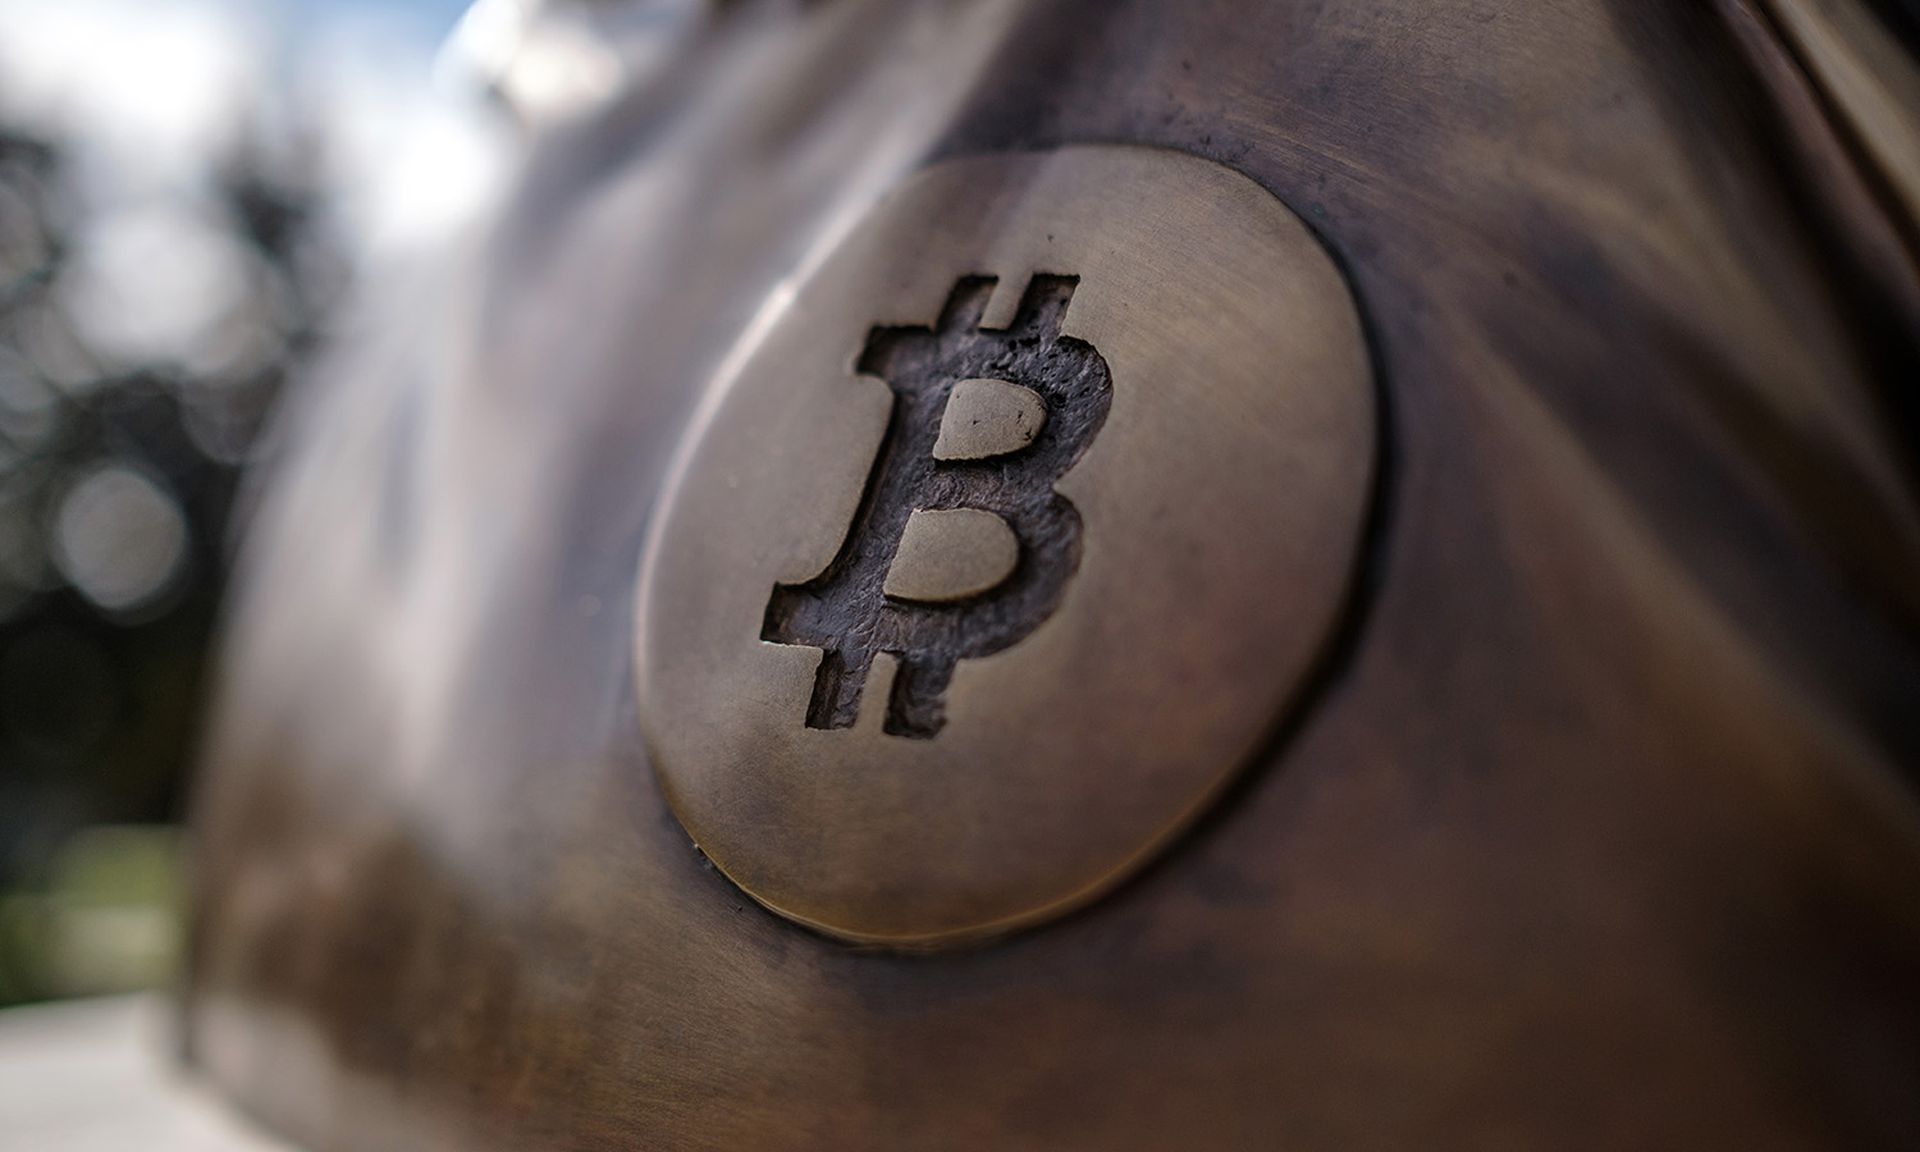 A detail of the statue of Satoshi Nakamoto, a presumed pseudonym used by the inventor of Bitcoin, is displayed in Graphisoft Park on Sept. 22, 2021, in Budapest, Hungary. The U.S. Treasury Department issued guidance to promote sanctions compliance in the virtual currency industry aimed at curbing ransomware. (Photo by Janos Kummer/Getty Images)